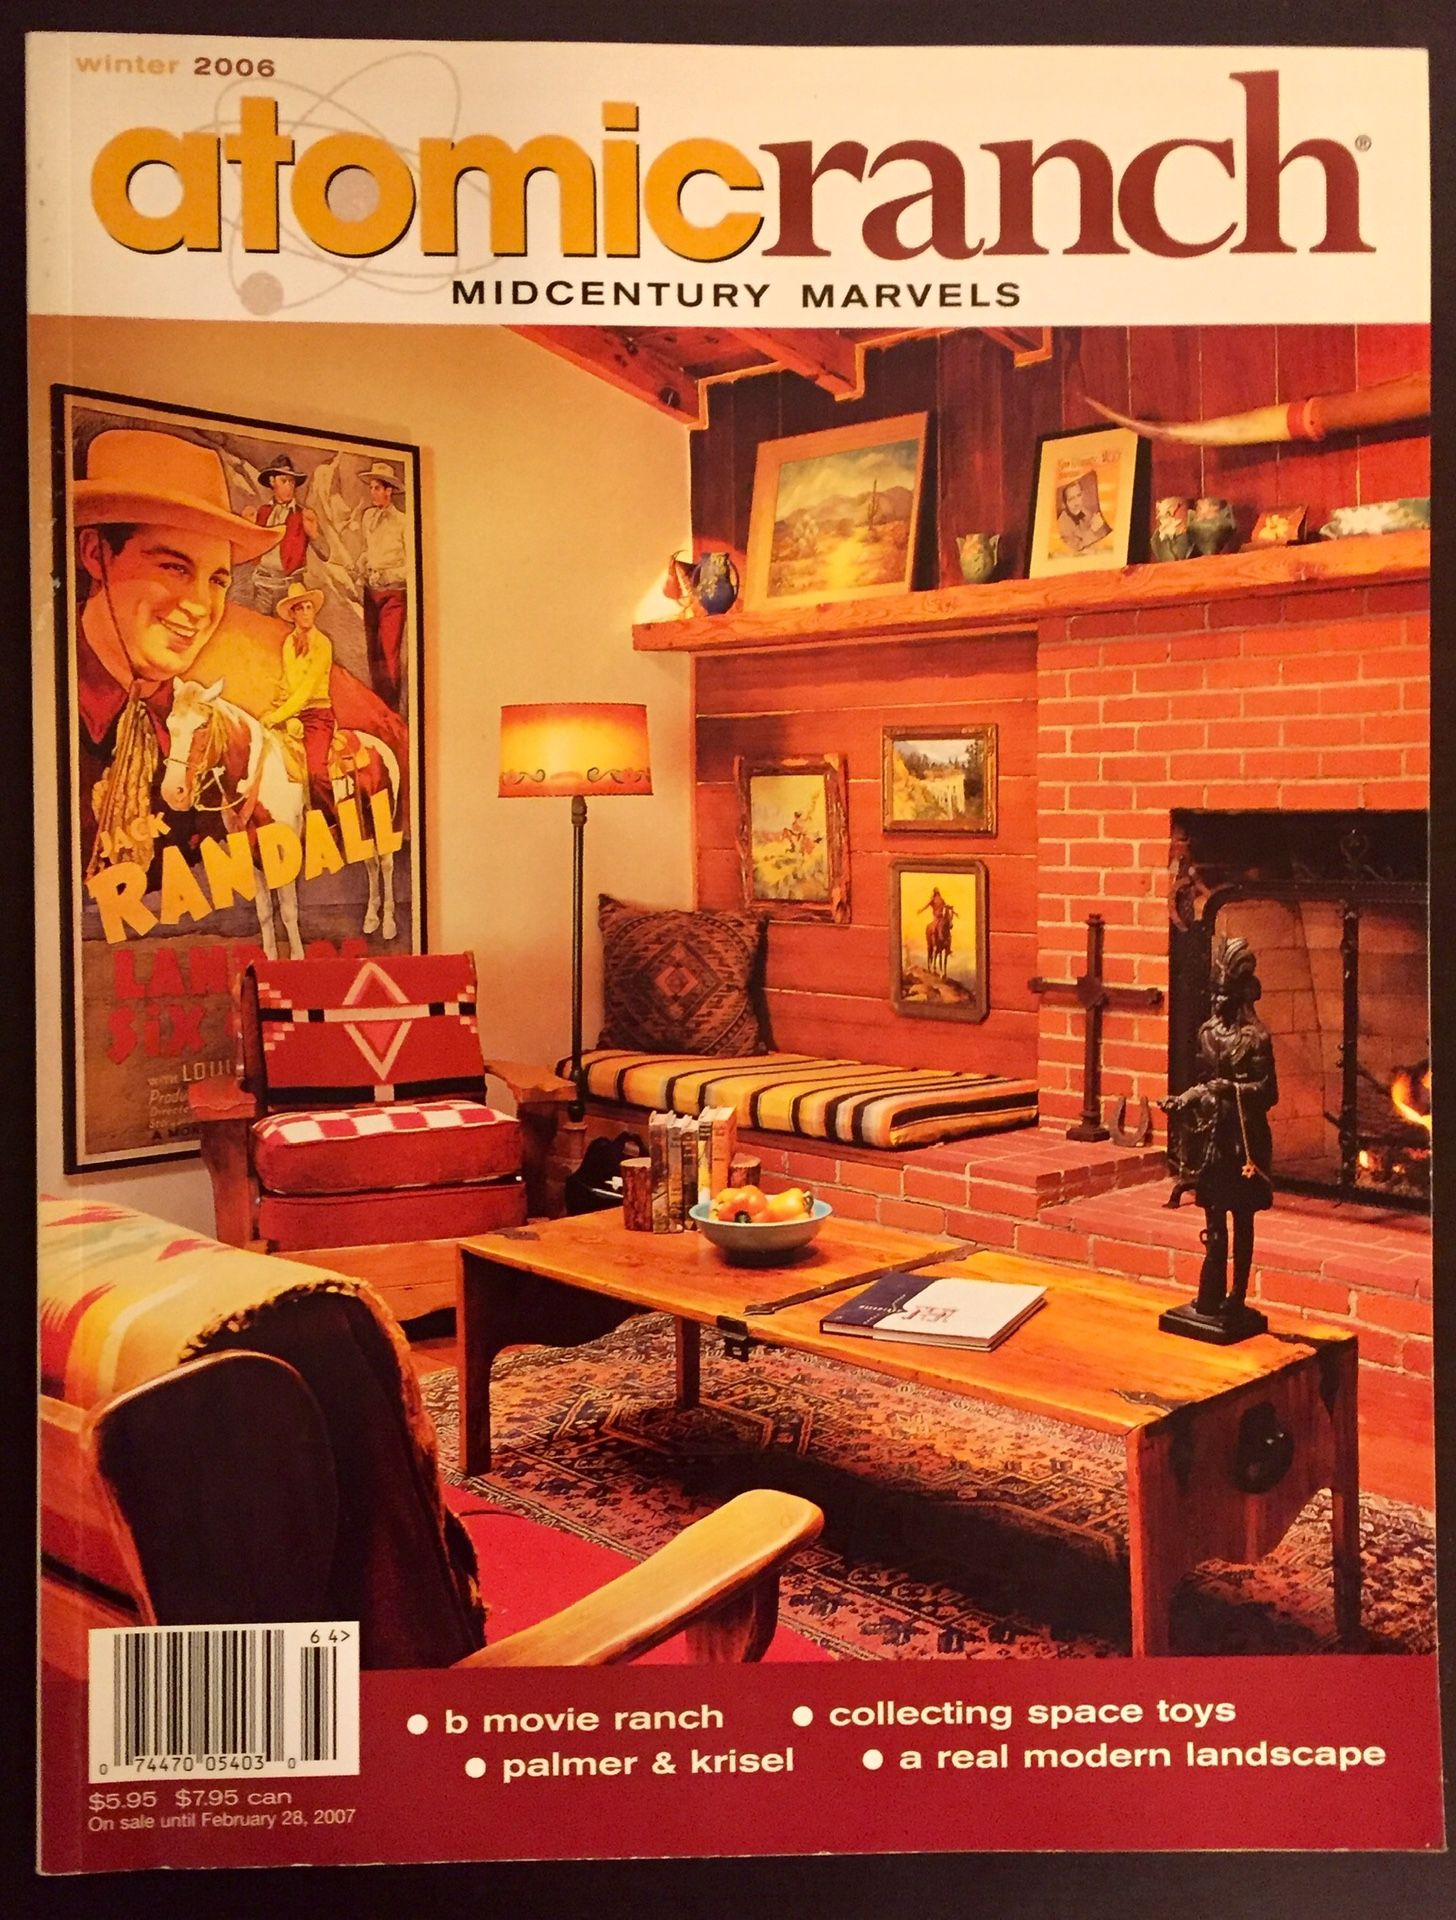 Atomic Ranch Magazine Back Issues, $1 each